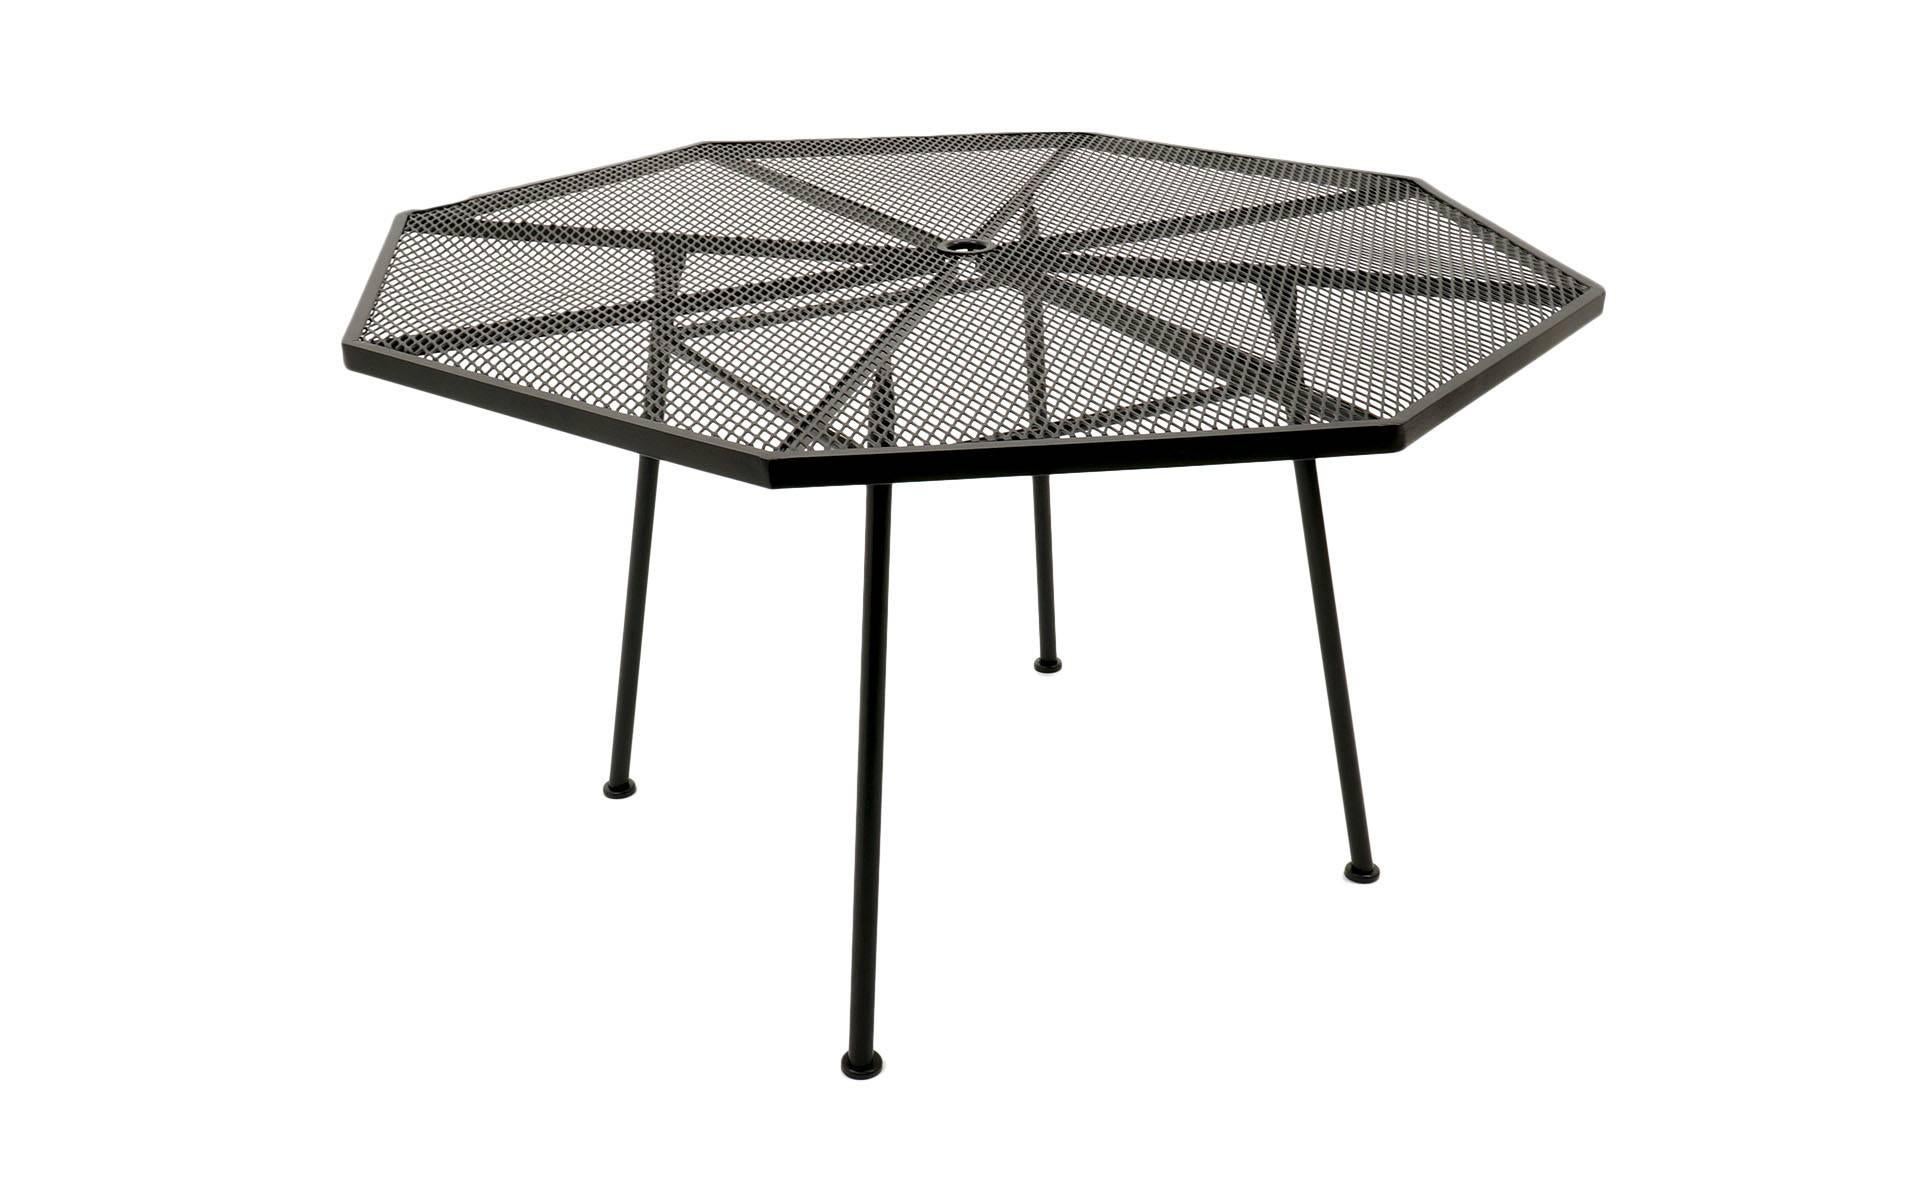 Powder-Coated Russell Woodard Sculptura Outdoor/Patio Dining Sets Otagonal Tables Eight Chairs